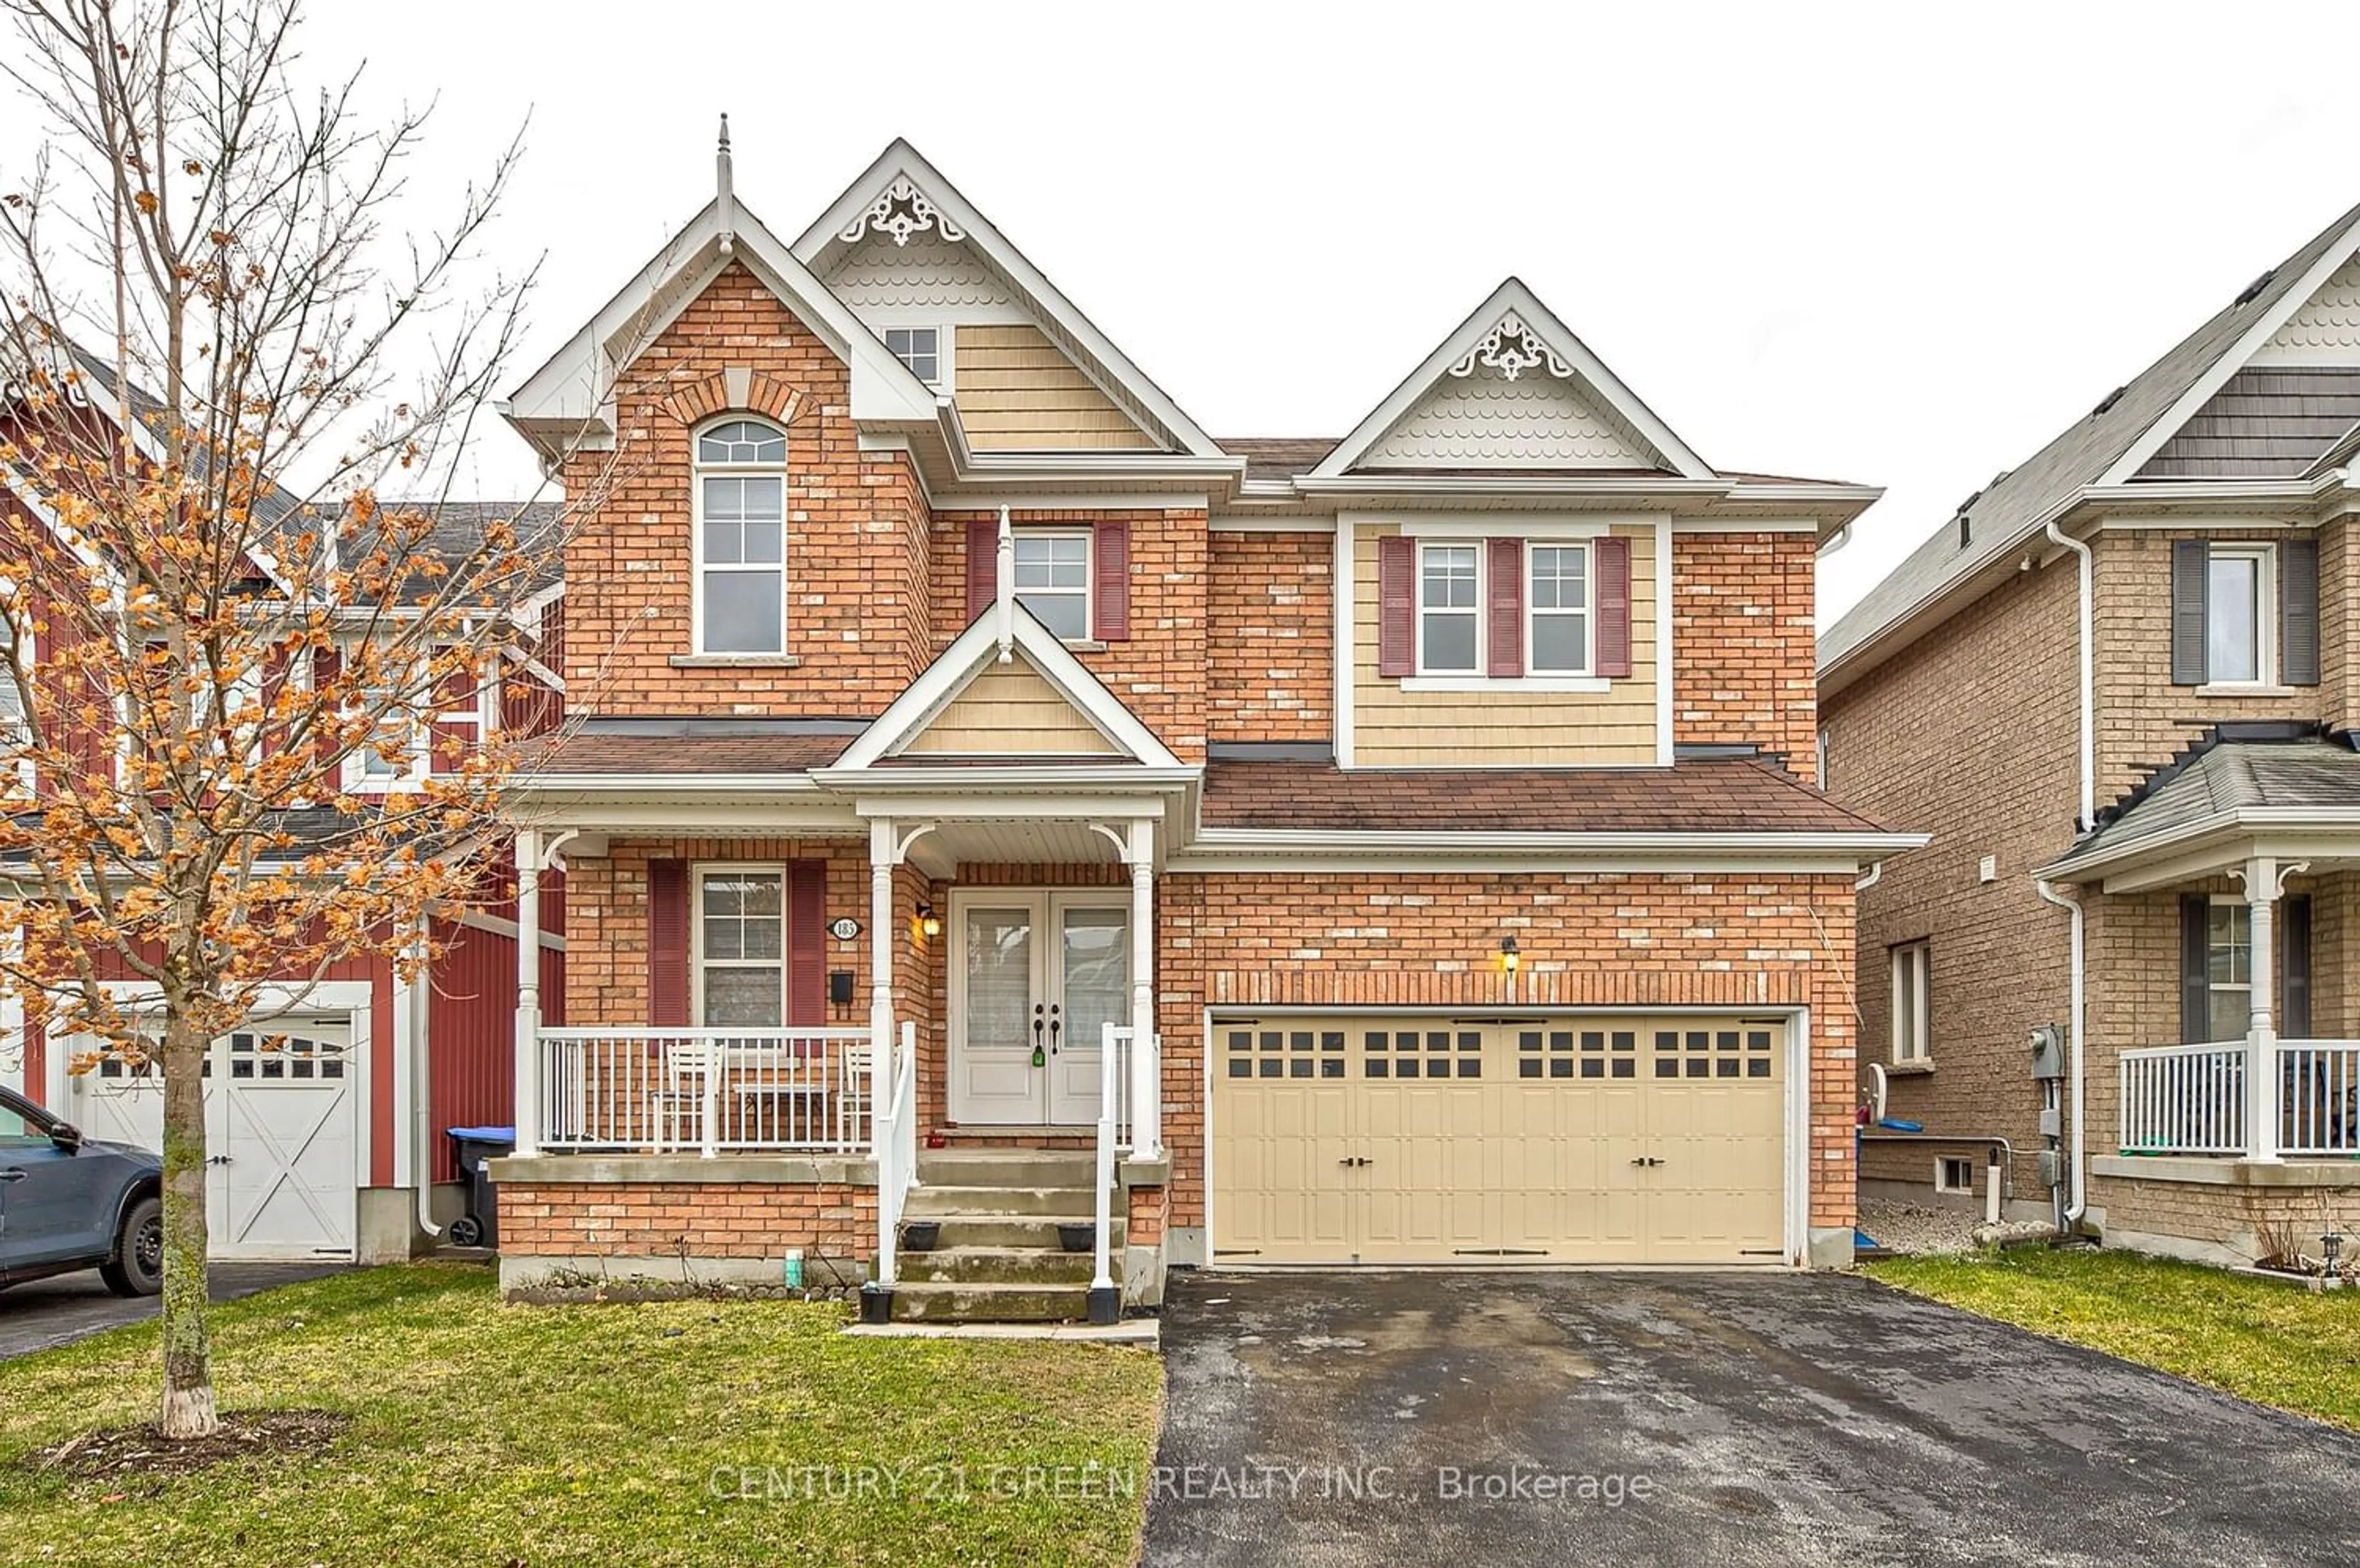 Home with brick exterior material for 185 Shephard Ave, New Tecumseth Ontario L9R 0K1